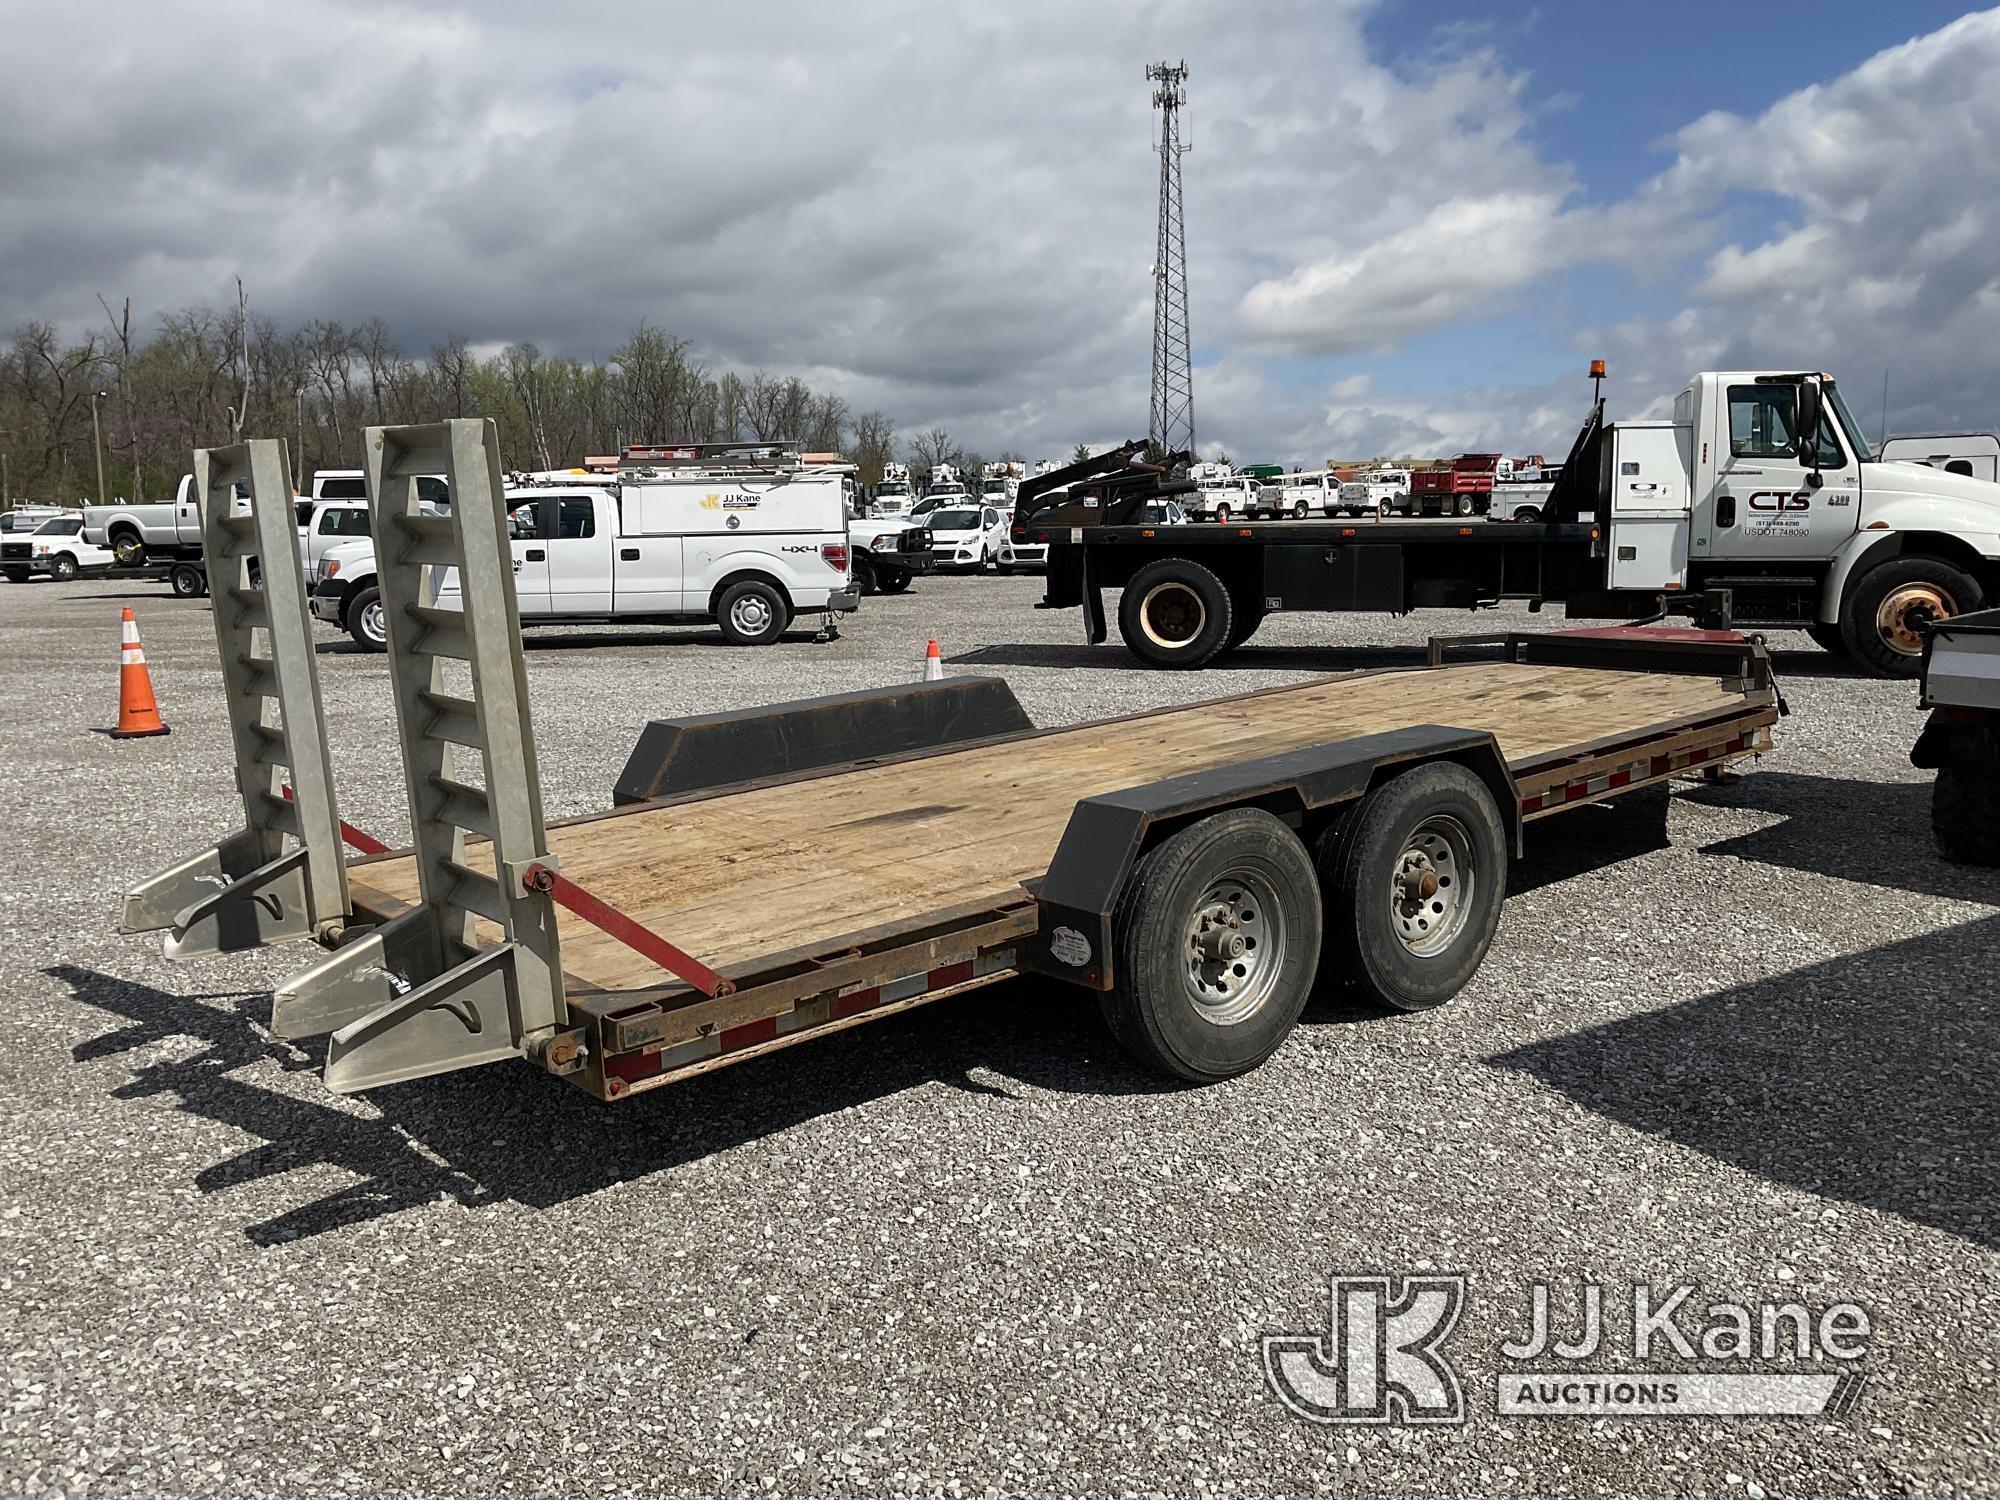 (Verona, KY) 2020 Valley Trailers T/A Tagalong Equipment Trailer CERTIFICATE OF REGISTRATION ONLY) (